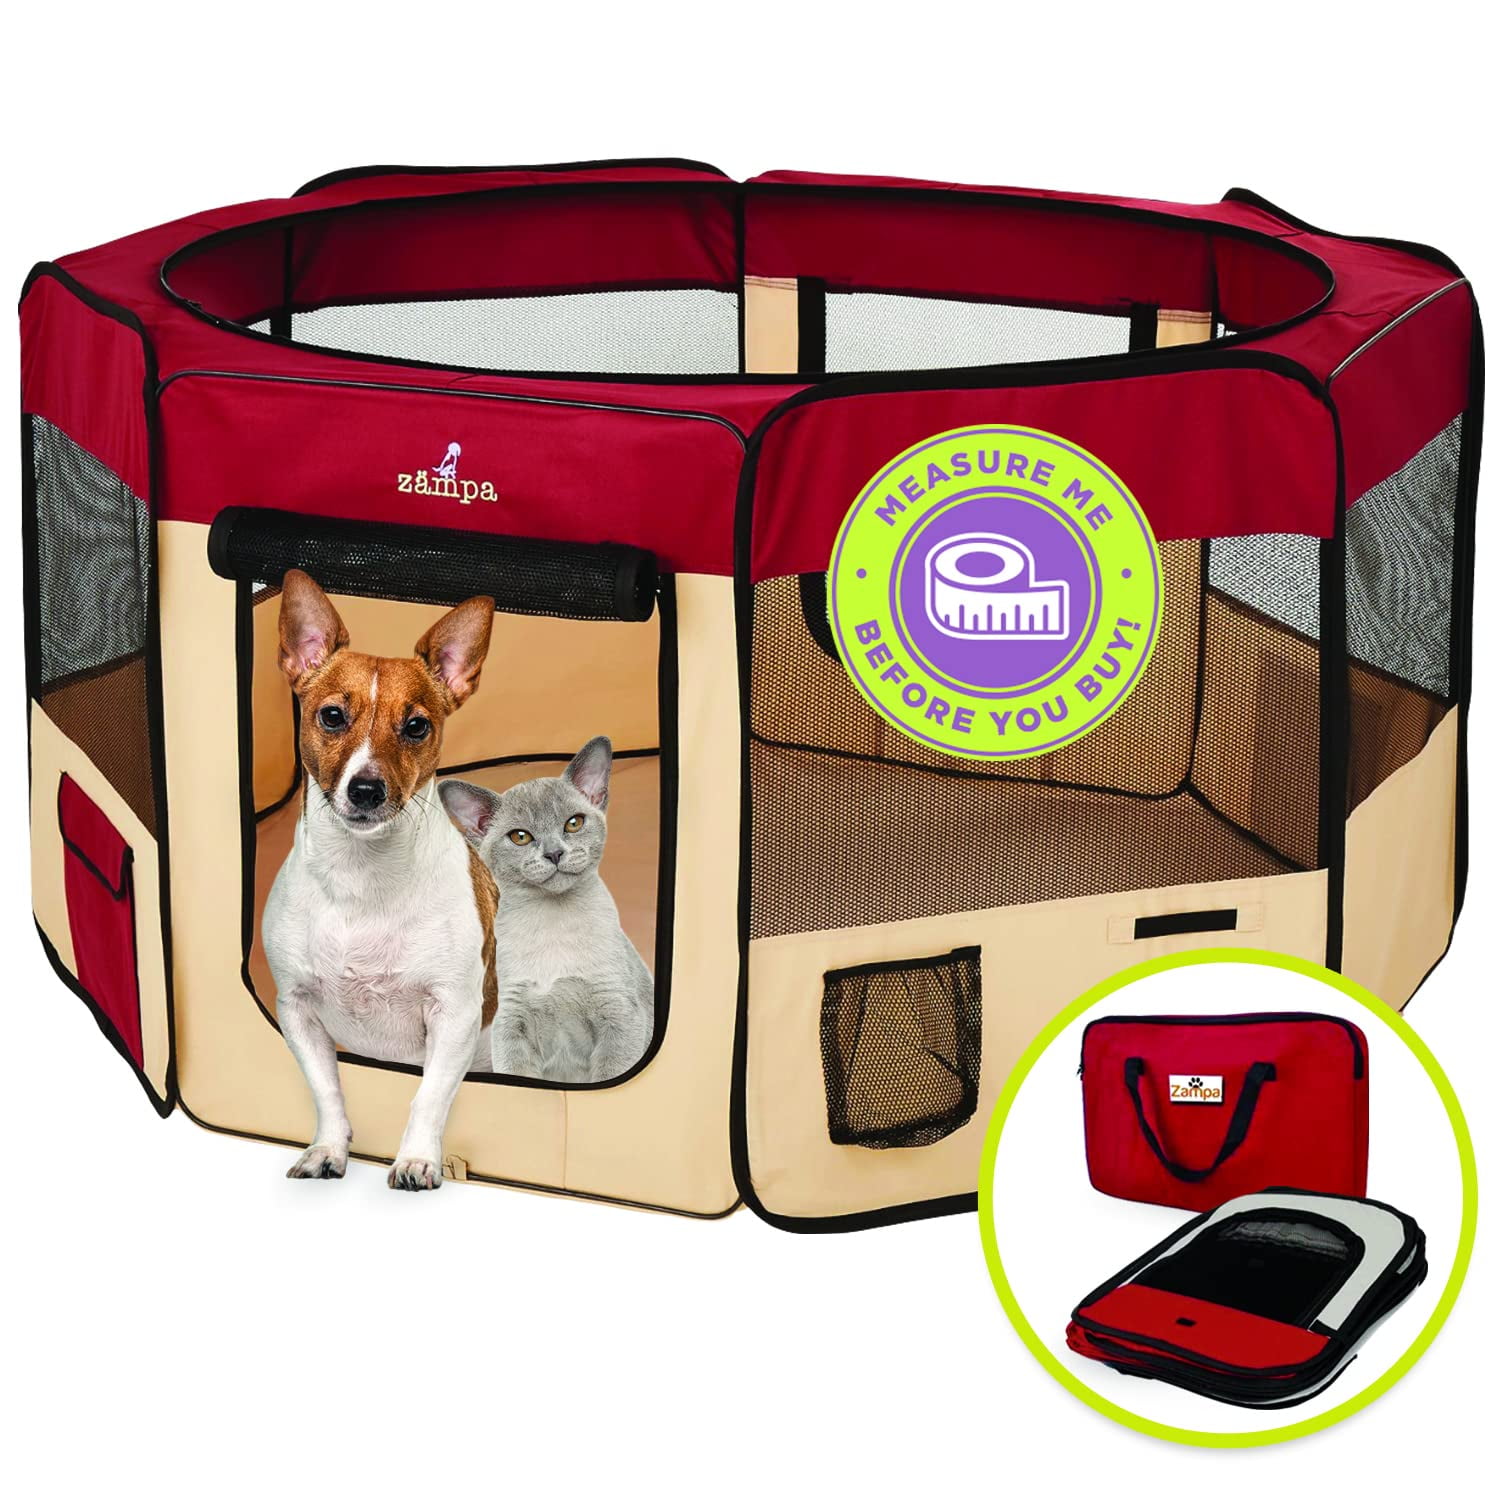 Small Pet Dog Cat Tent Playpen Exercise Play Pen Soft Crate Fence Case Burgundy 